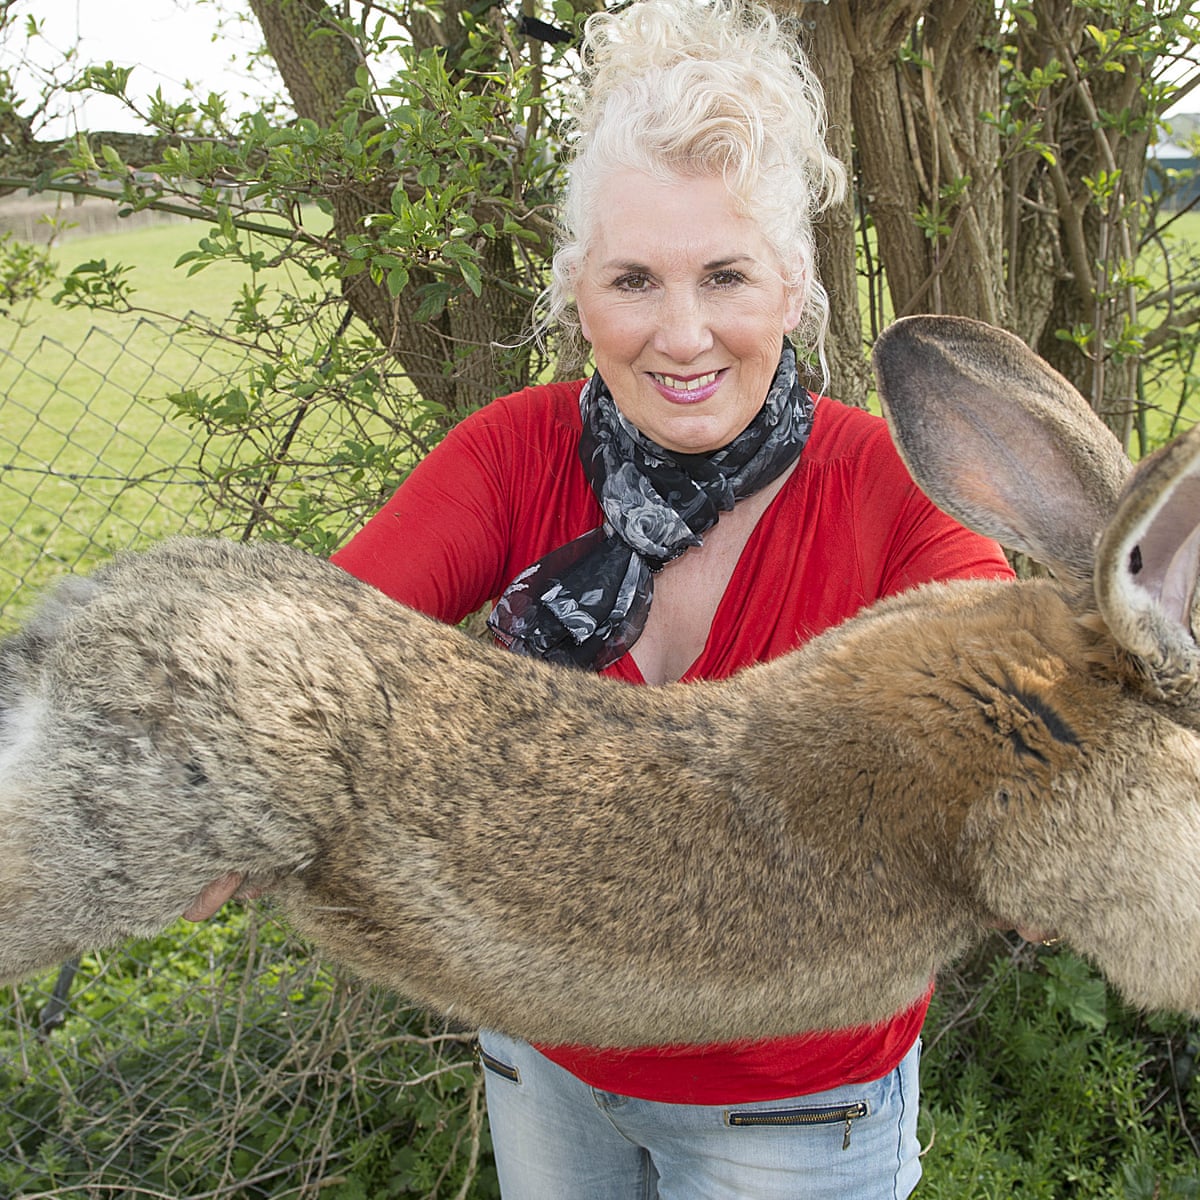 Pet detective says stolen giant rabbit is 'still hot' and a smuggling risk  | Animals | The Guardian